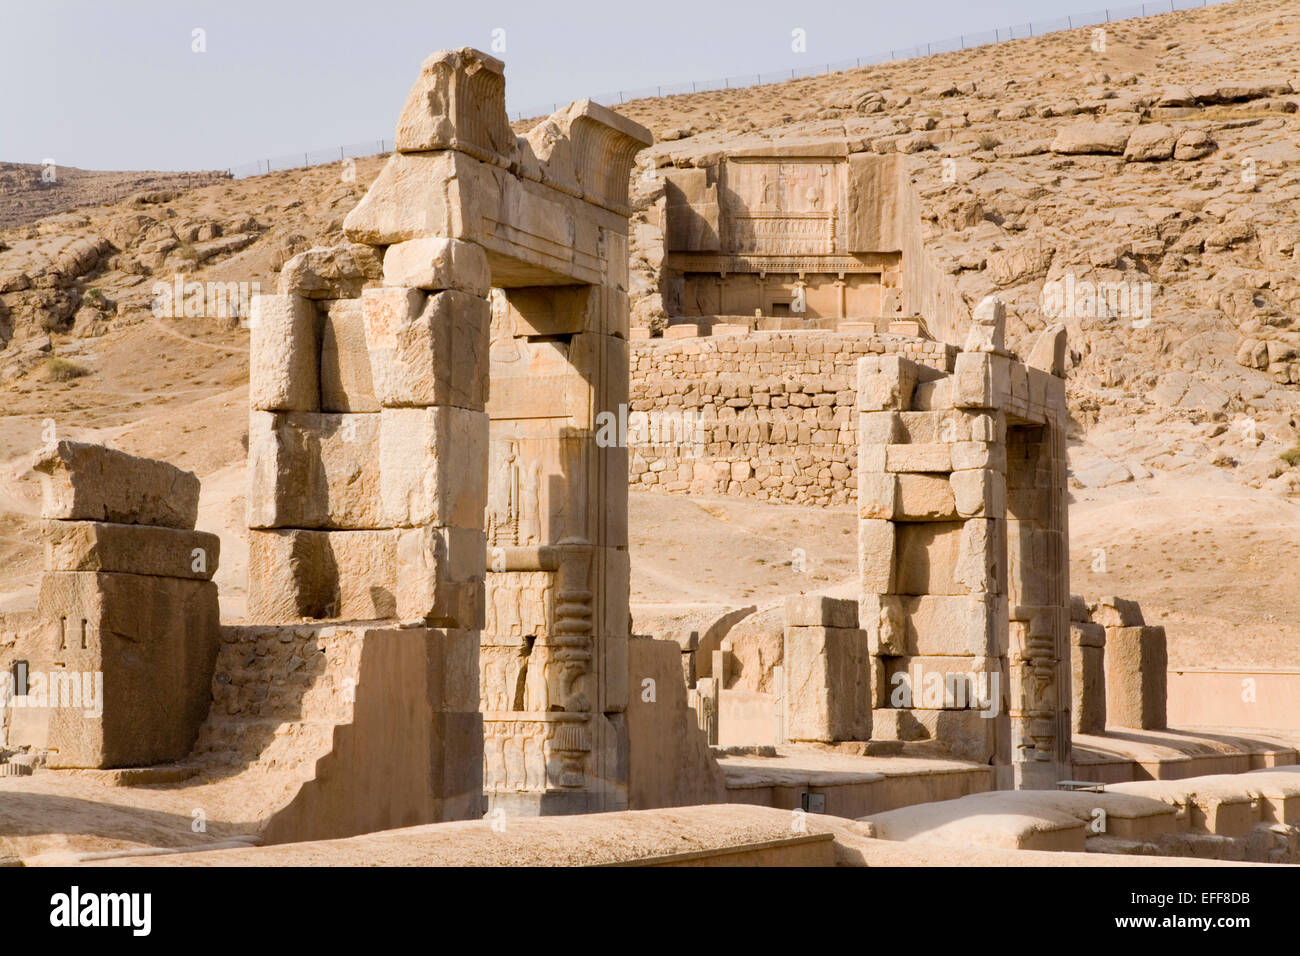 Gateway to Kings Palace and Tomb, Persepolis, Iran or Persia Stock Photo